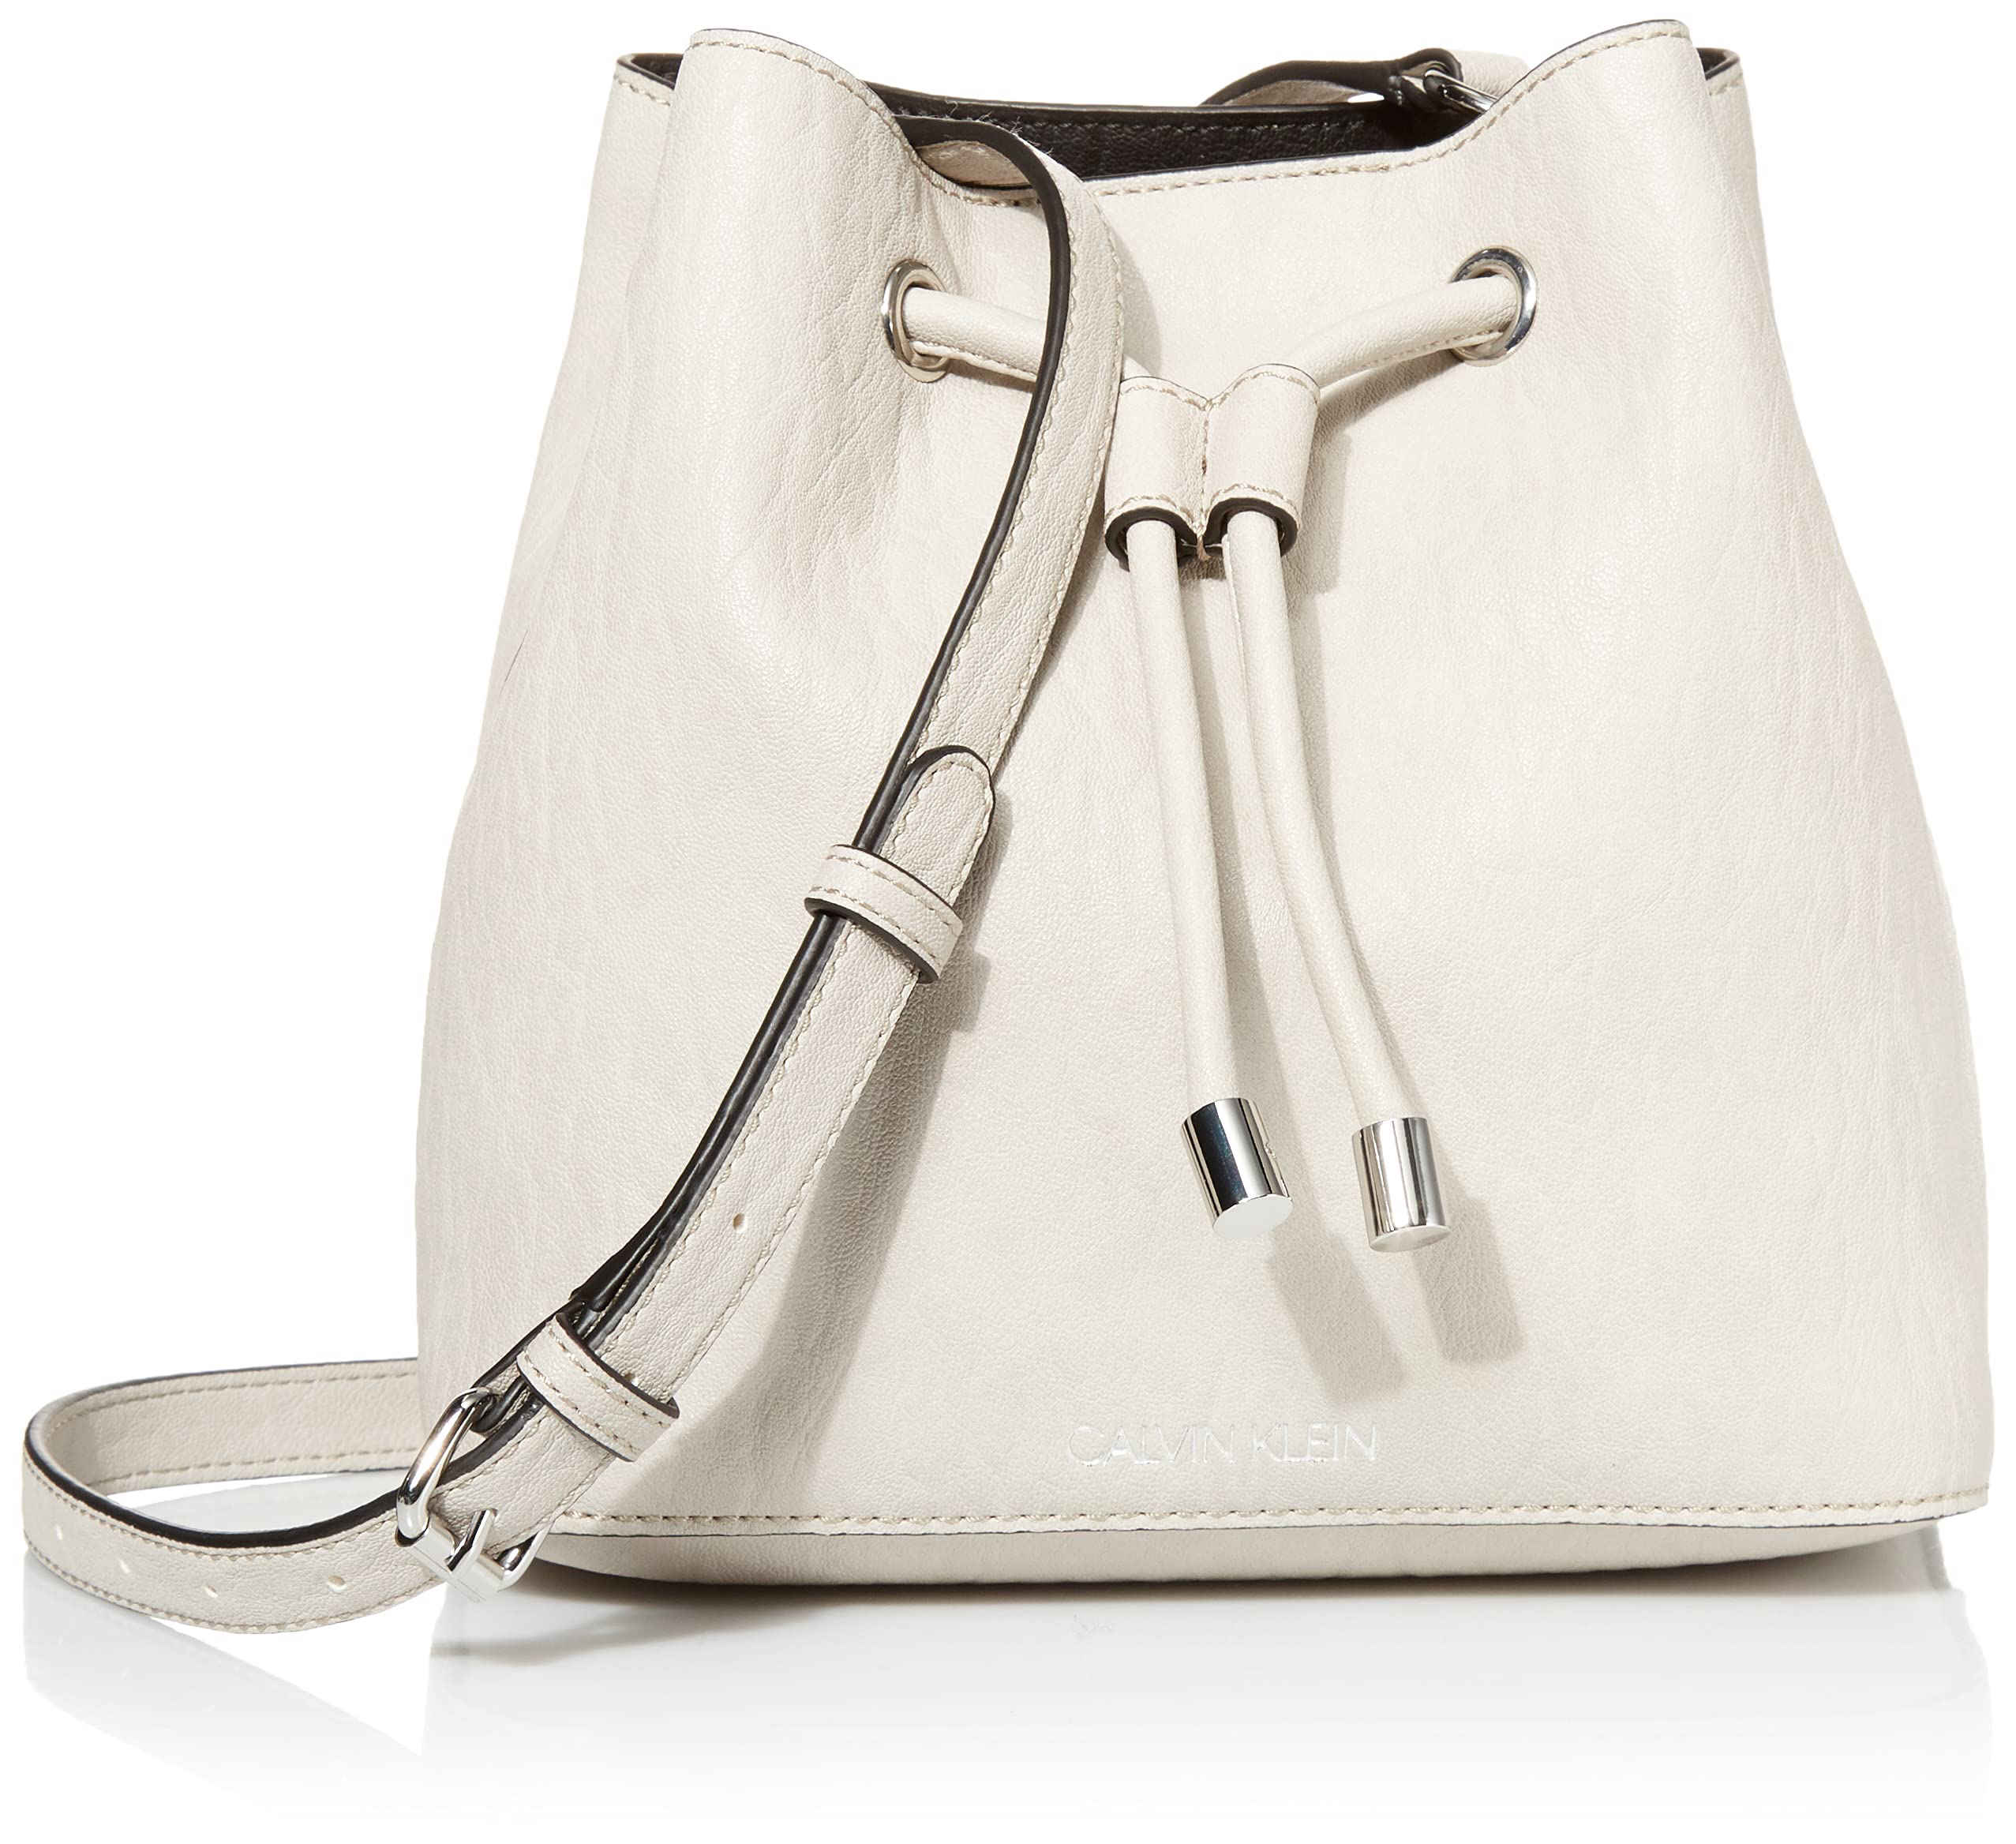 Calvin Klein Bags for Women Philippines - Calvin Klein Womens Bags for sale  Online 